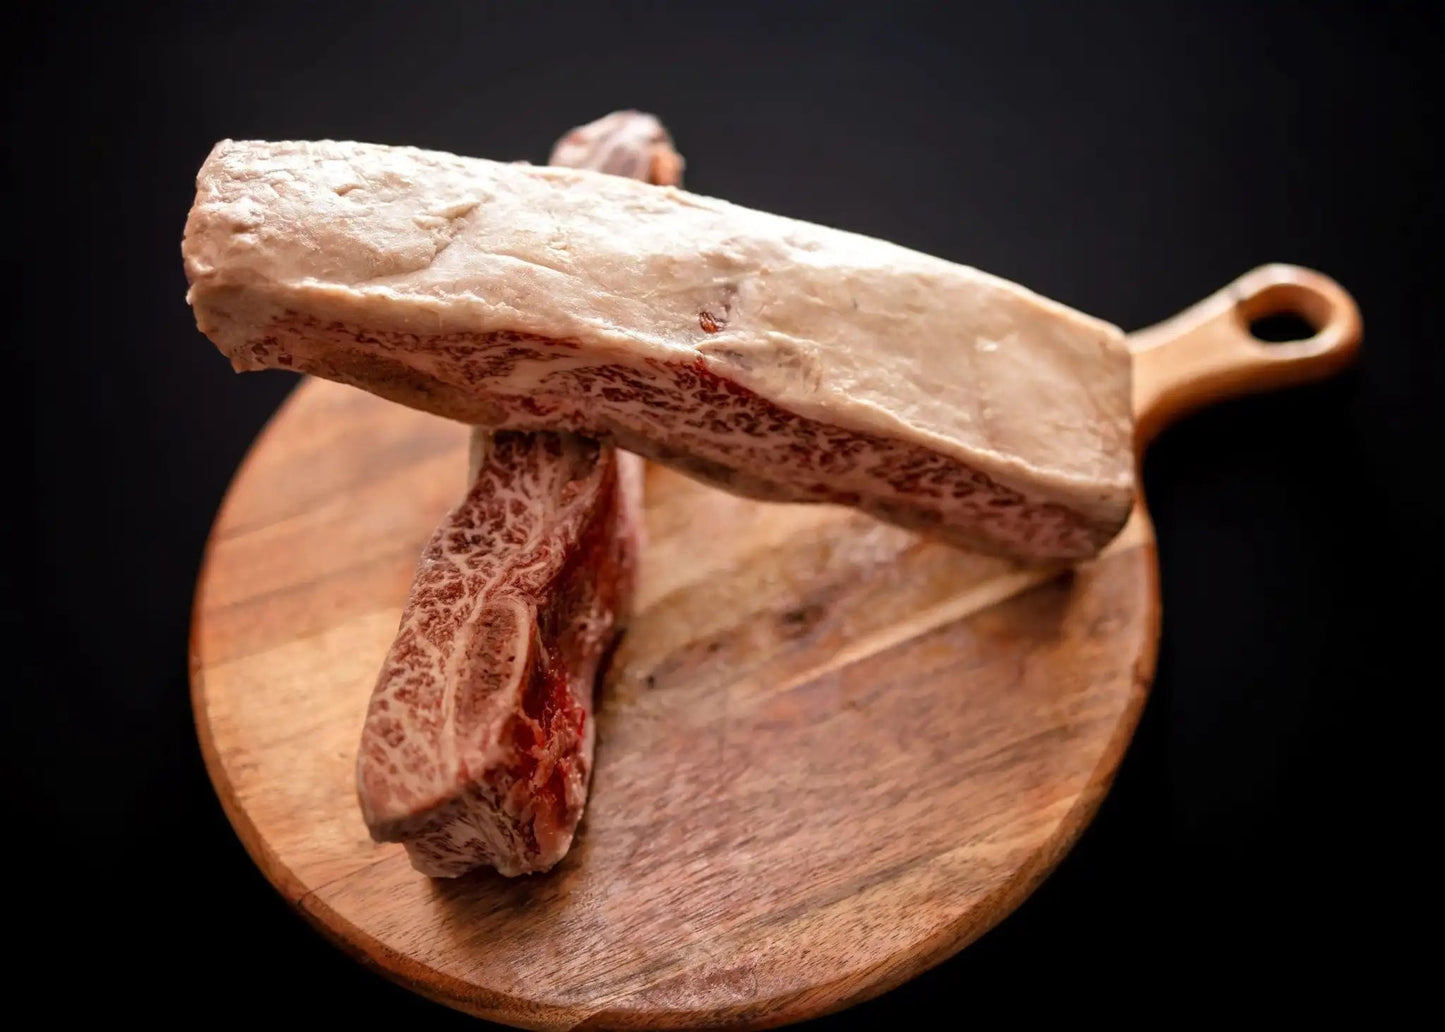 100% All-Natural Grass-Fed Pasture-Raised Wagyu Short RibsExperience the pinnacle of beef excellence with Hufeisen Ranch's 100% All-Natural Grass-Fed Pasture-Raised Wagyu Short Ribs. Cut flanken style across the bone, these100%The Hufeisen-Ranch (WYO Wagyu)